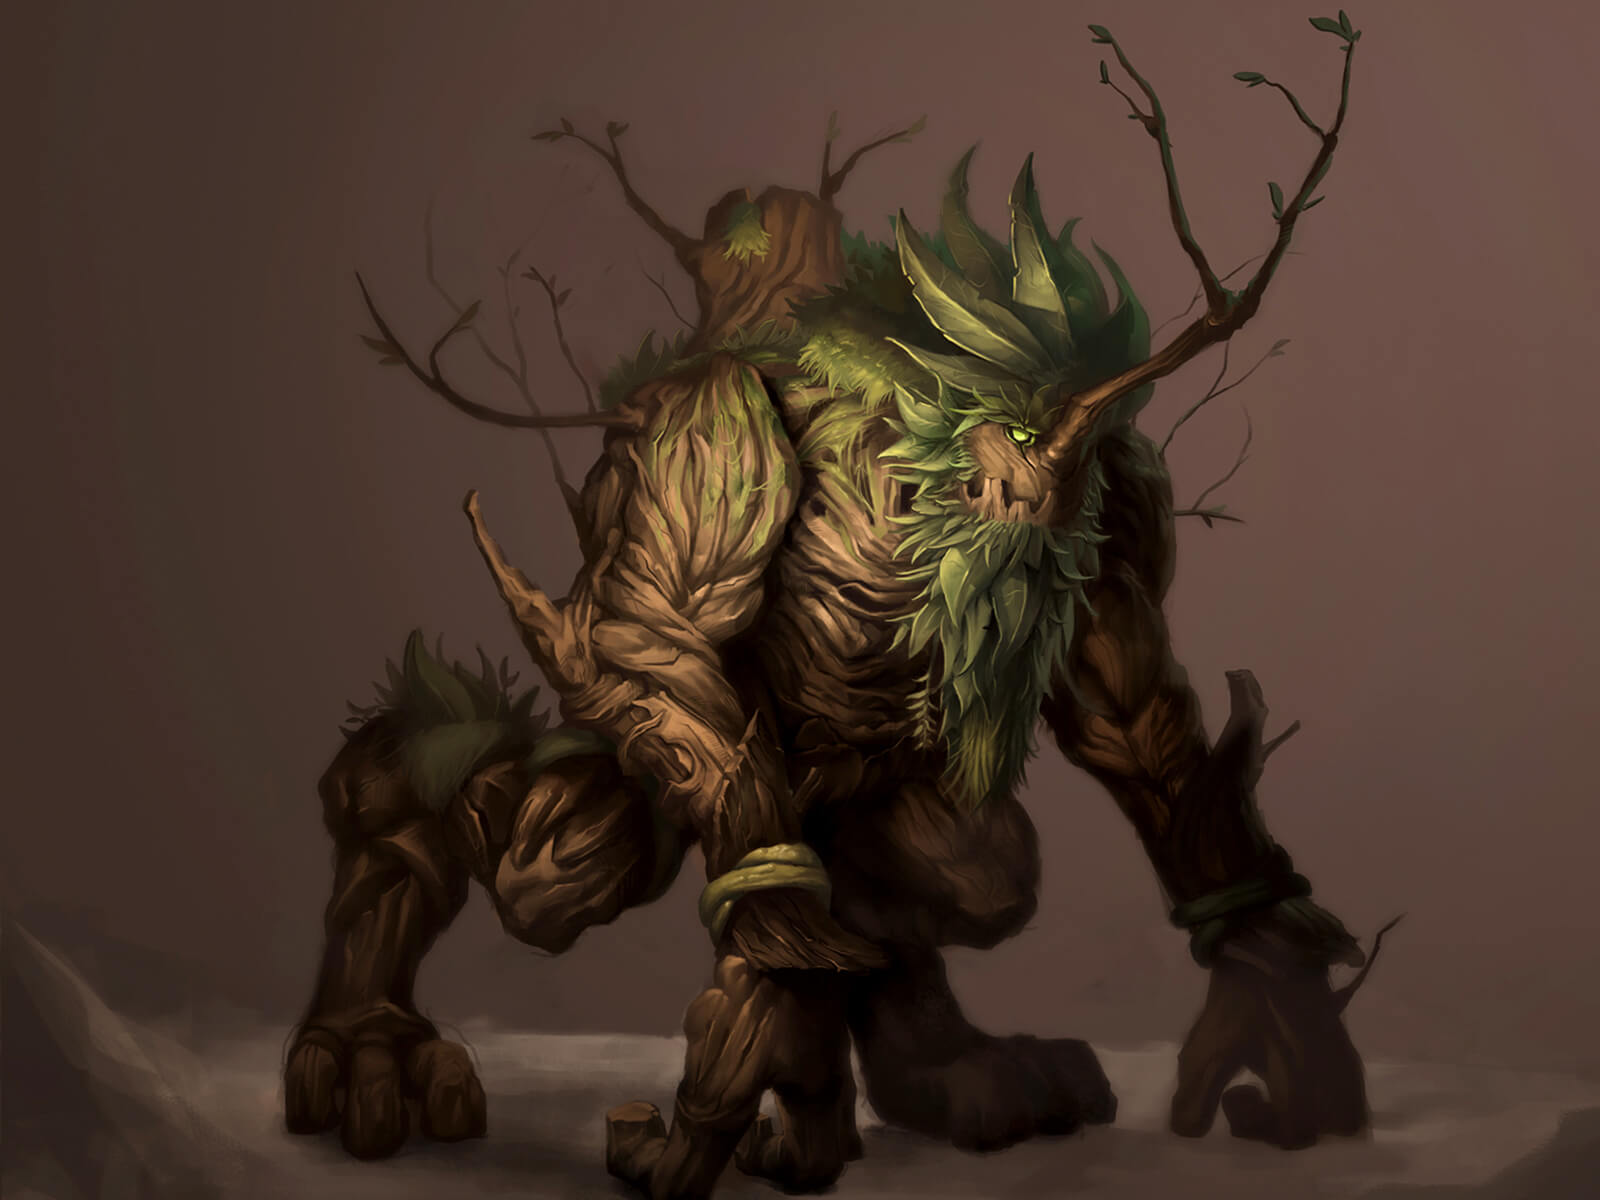 A quadrupedal beast made of wood, with a mane of leaves and grass, and a branch jutting out of its face like a horn.